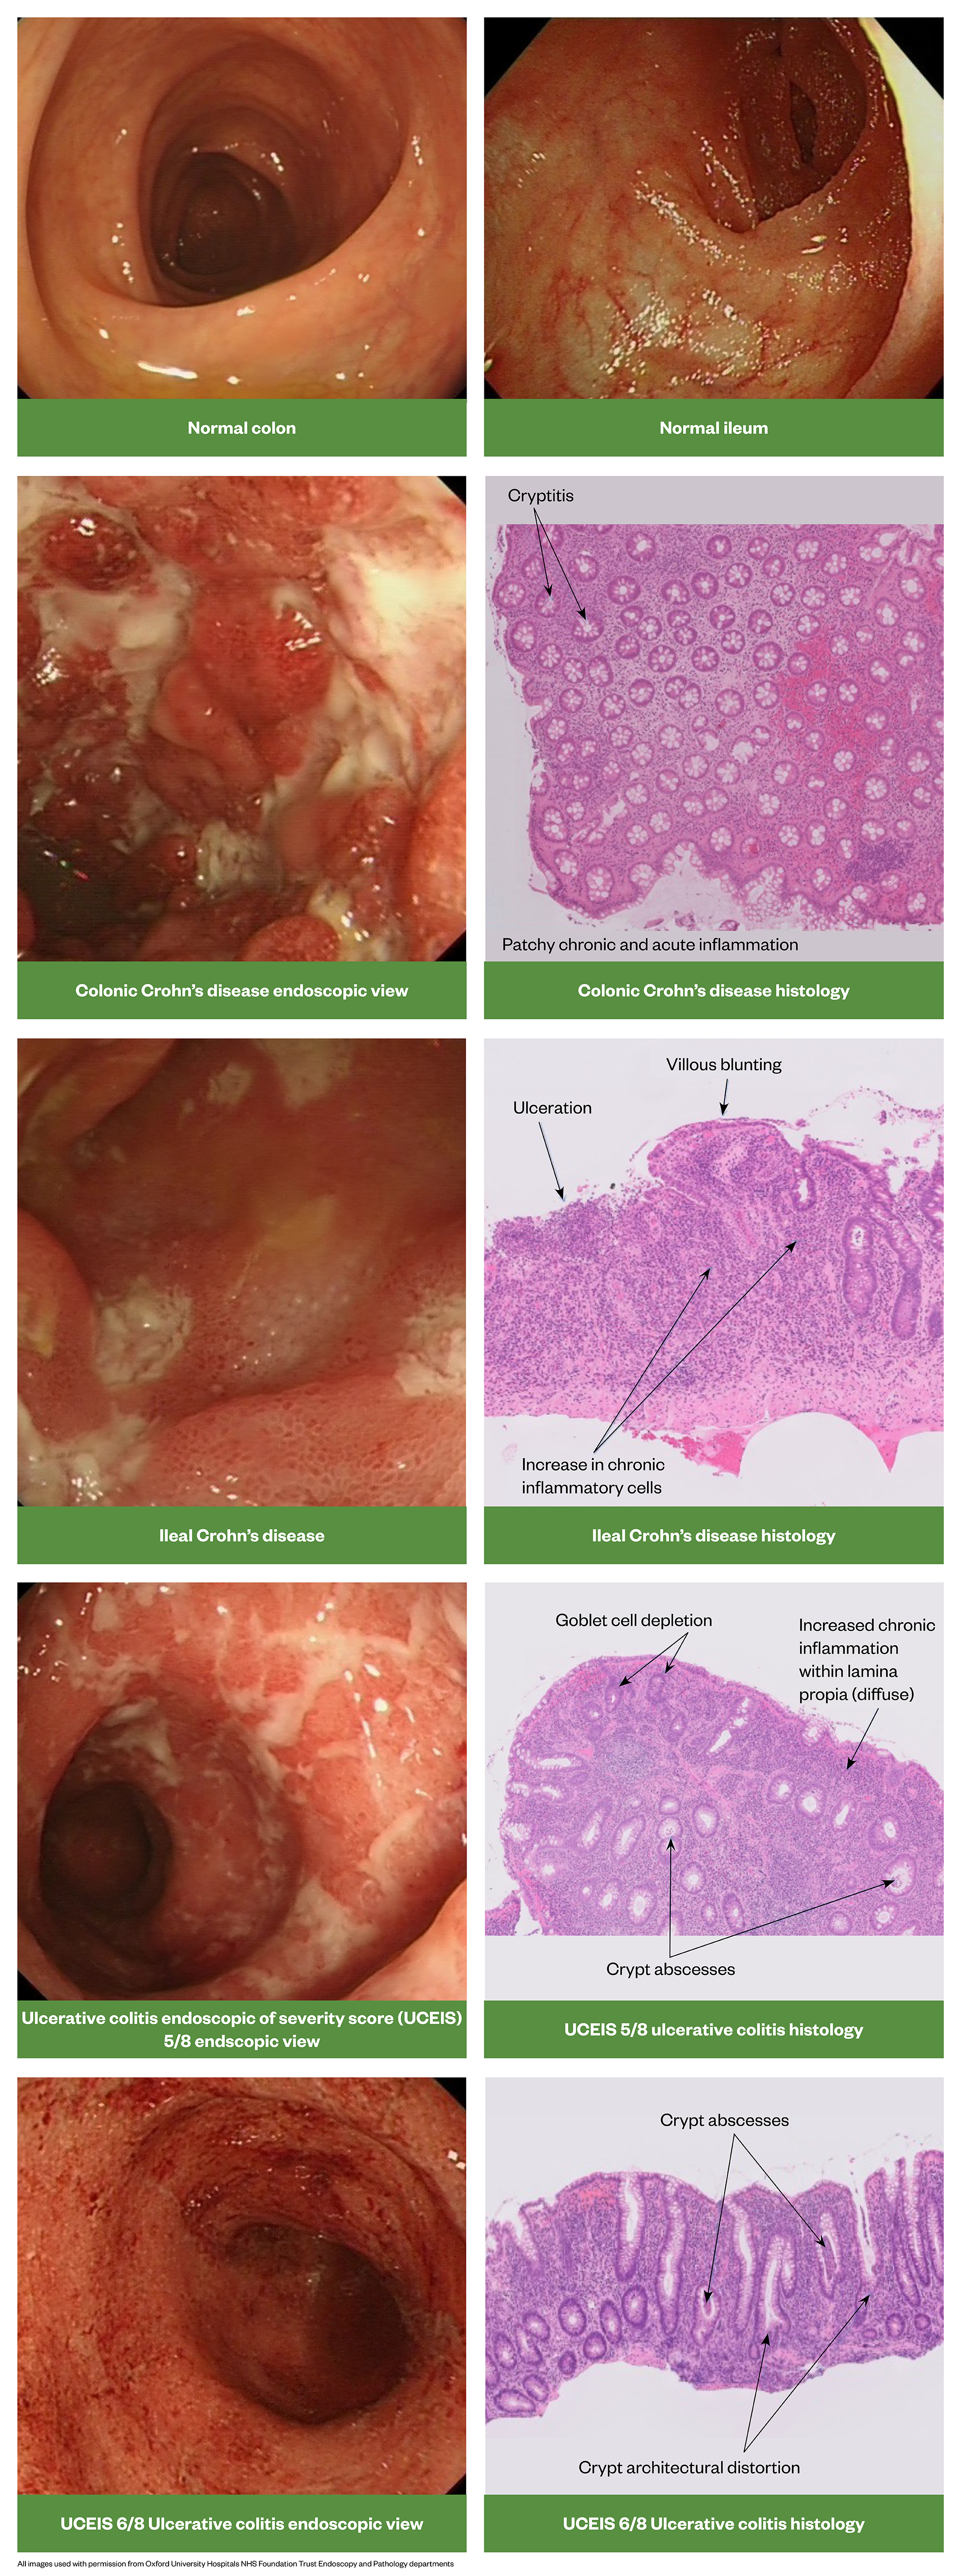 Figure 3–12: Endoscopic and histological views of Crohn's disease and ulcerative colitis